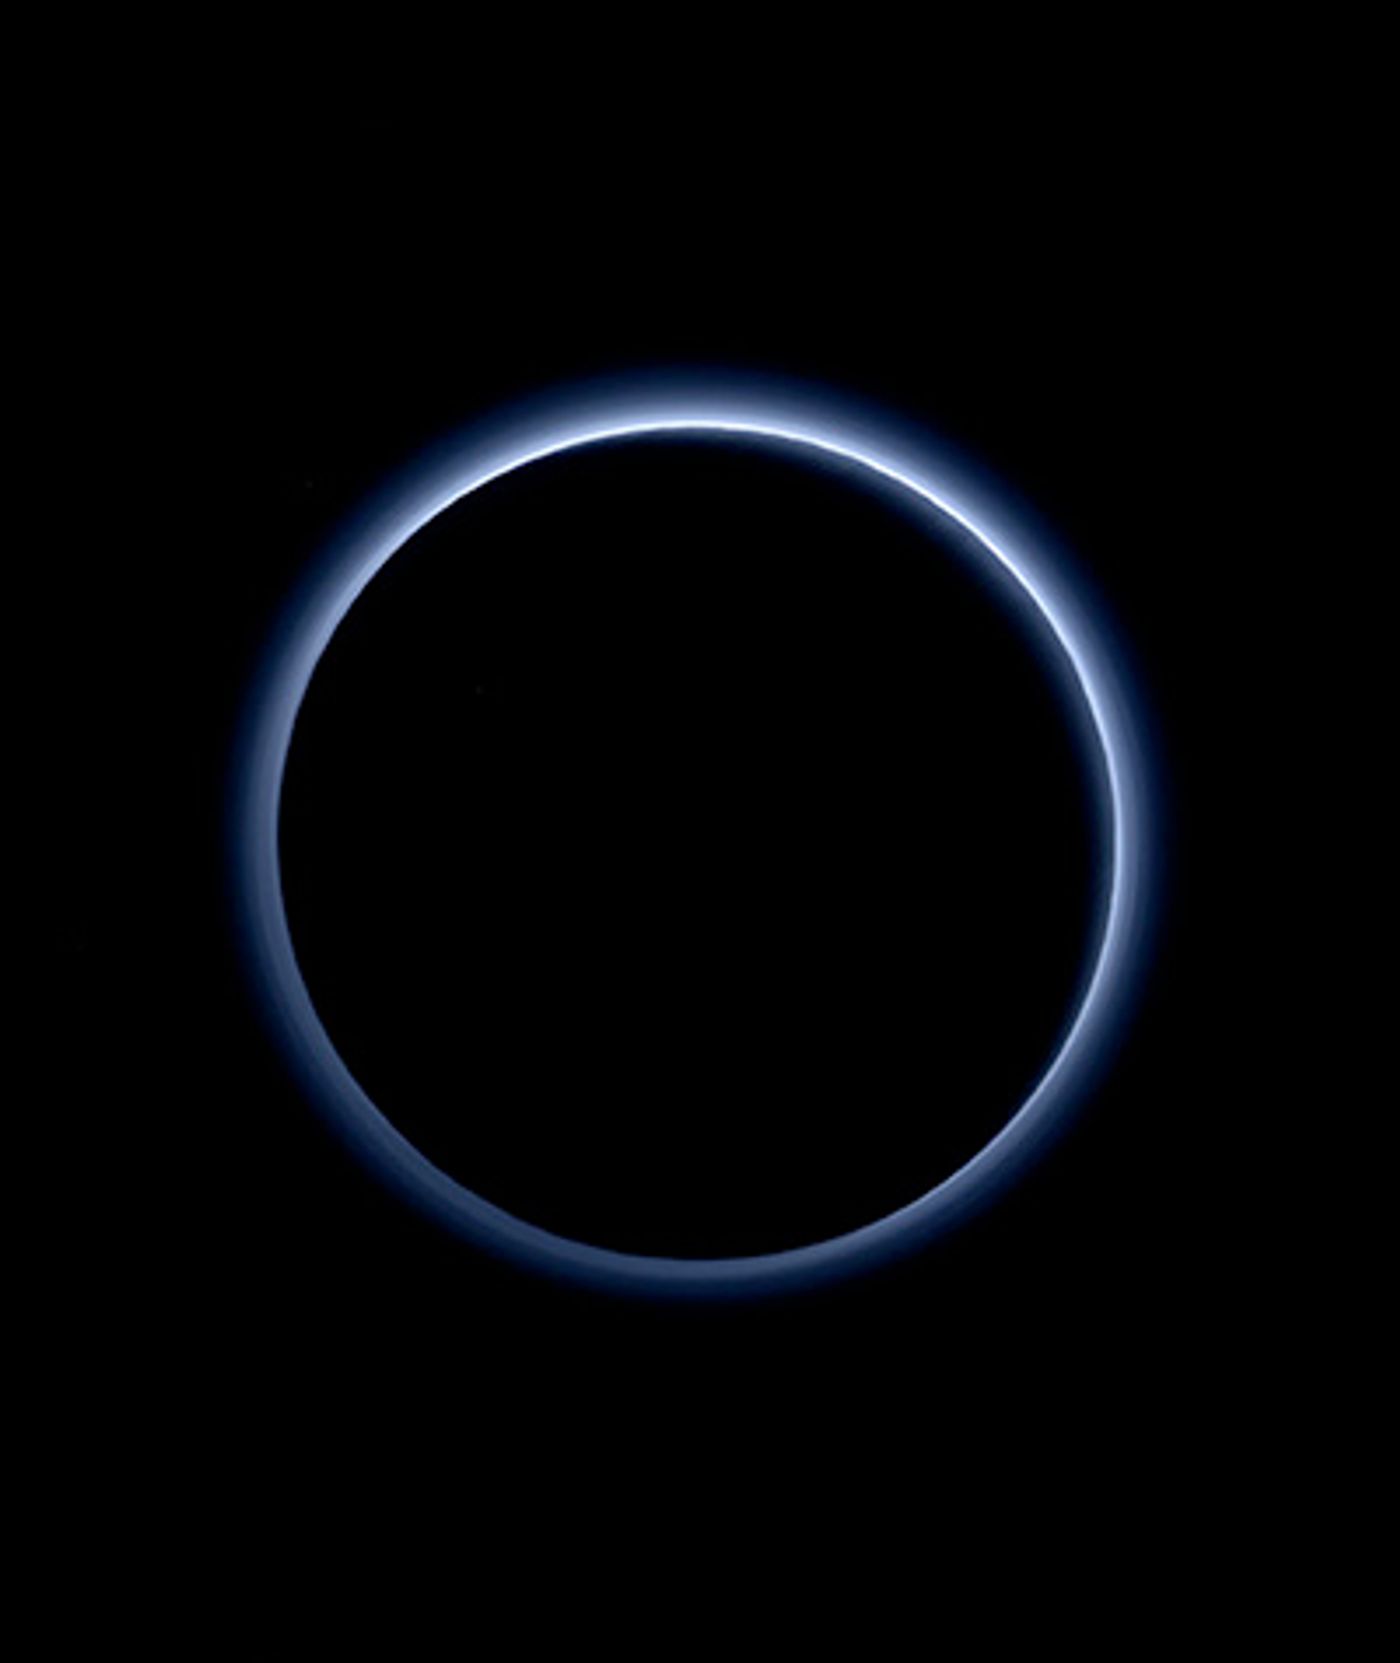 Here we see Pluto's hazy atmosphere, as pictured from New Horizons in 2015.